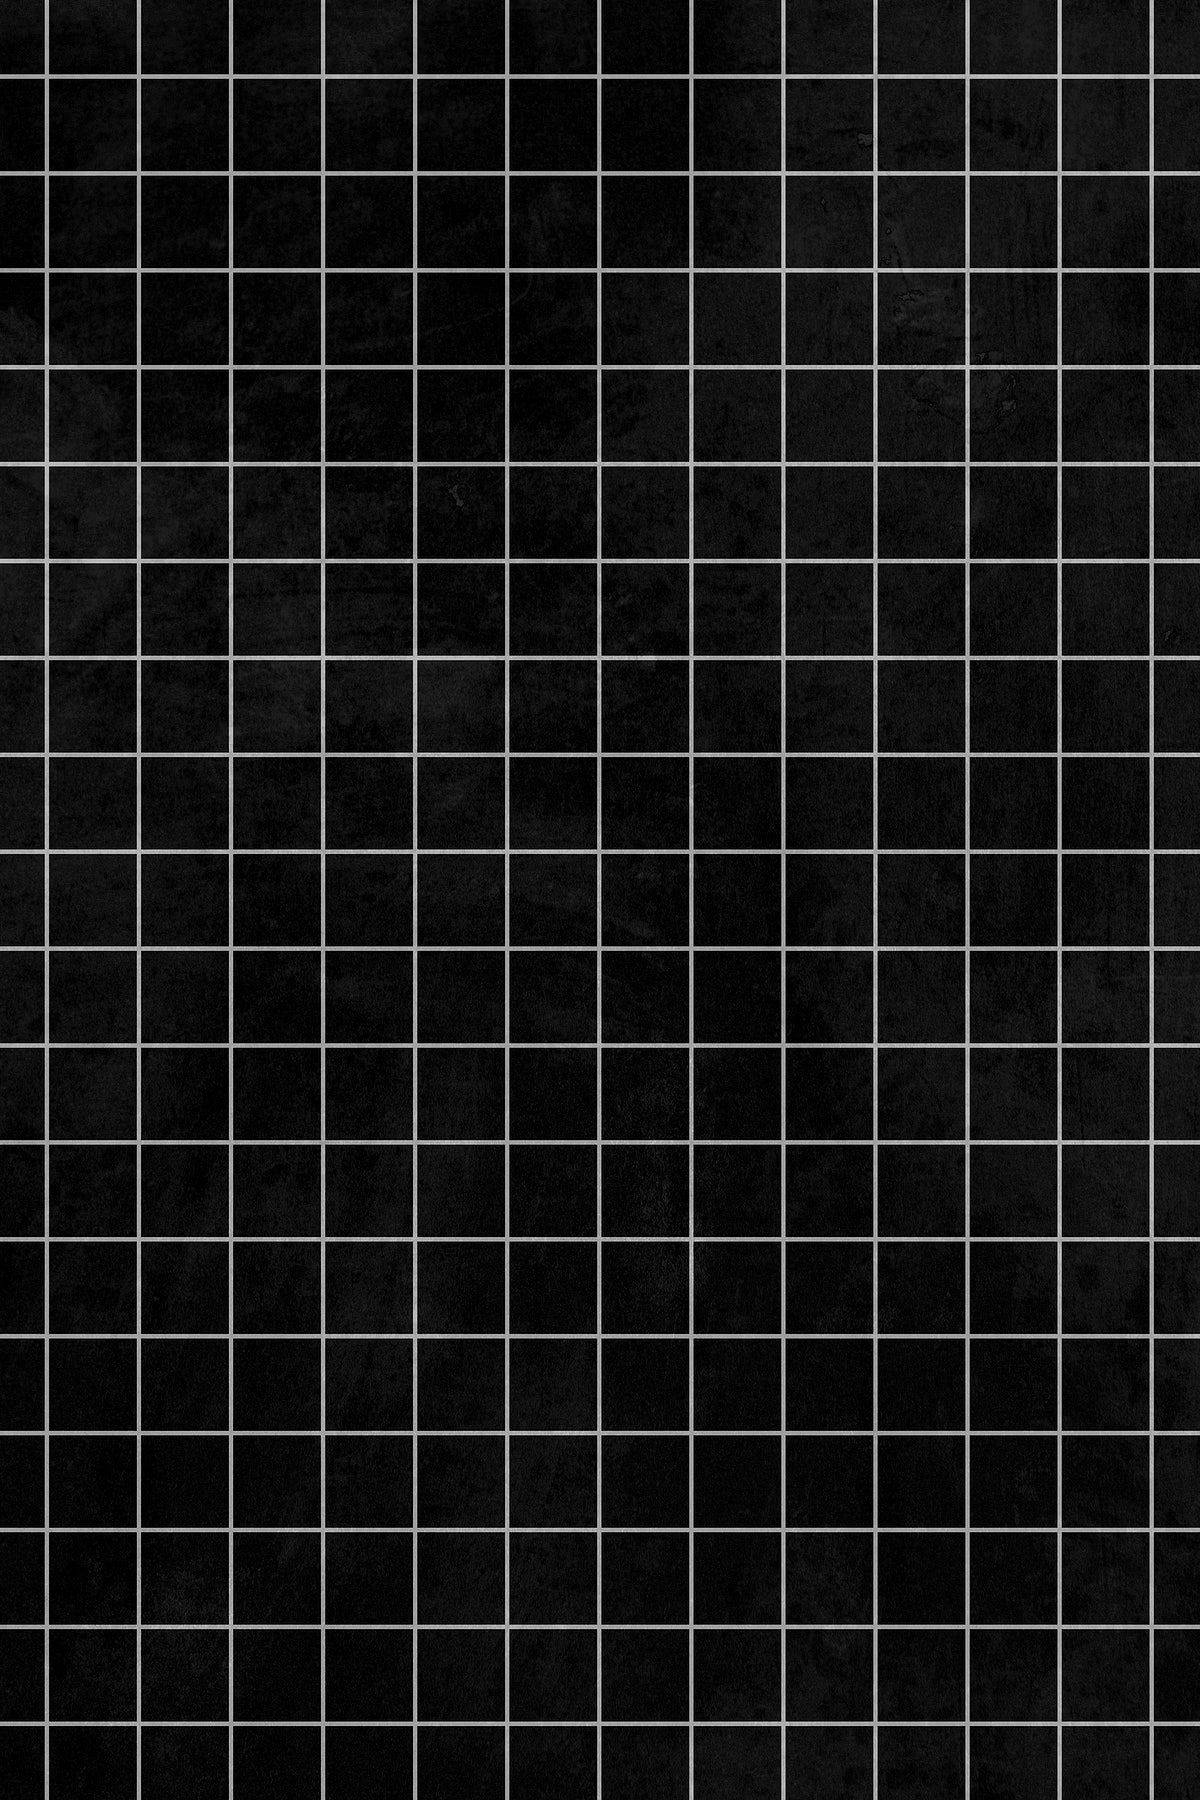 Textured Black And White Grid Aesthetic Wallpaper